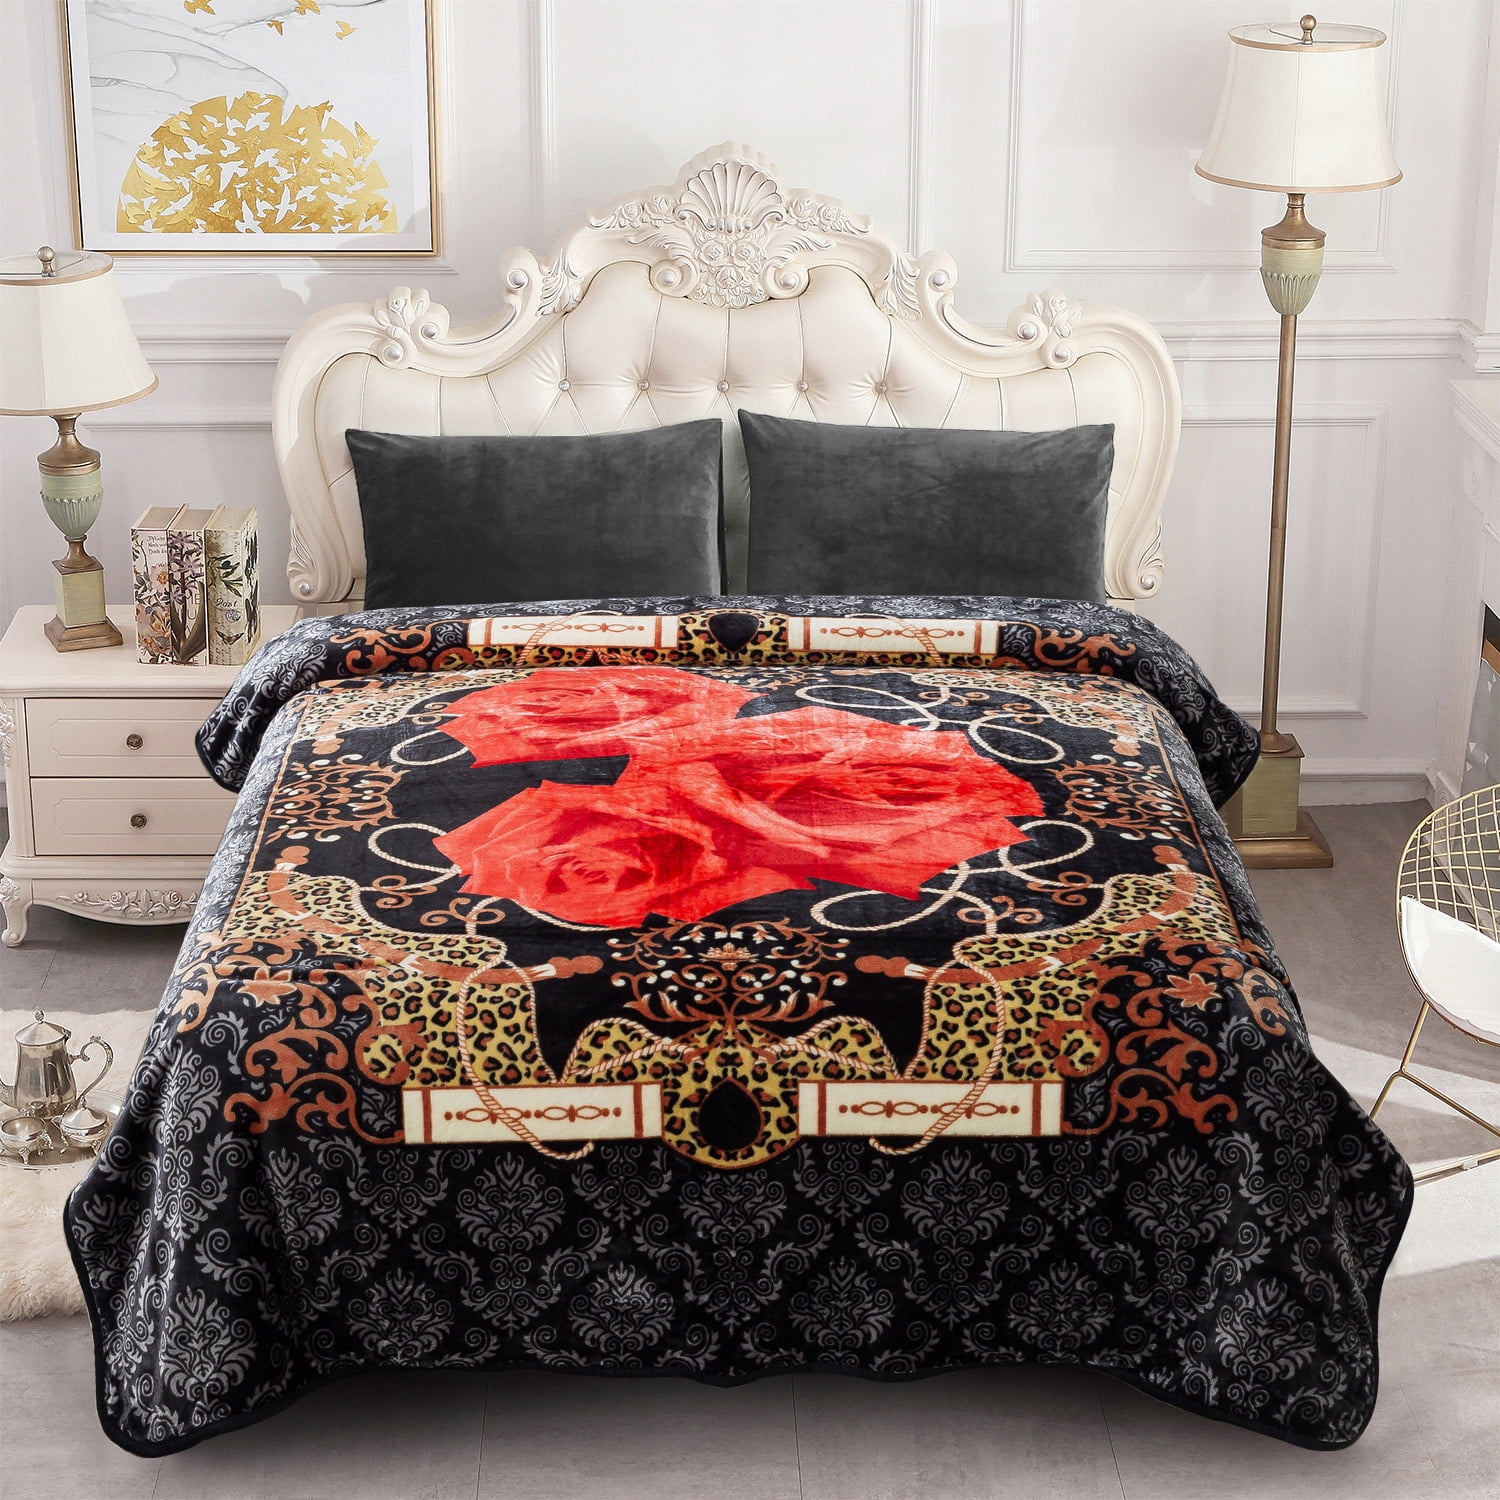 Cozy Earth Tone Floral Blanket / Red + Beige, Best Stylish Bedding